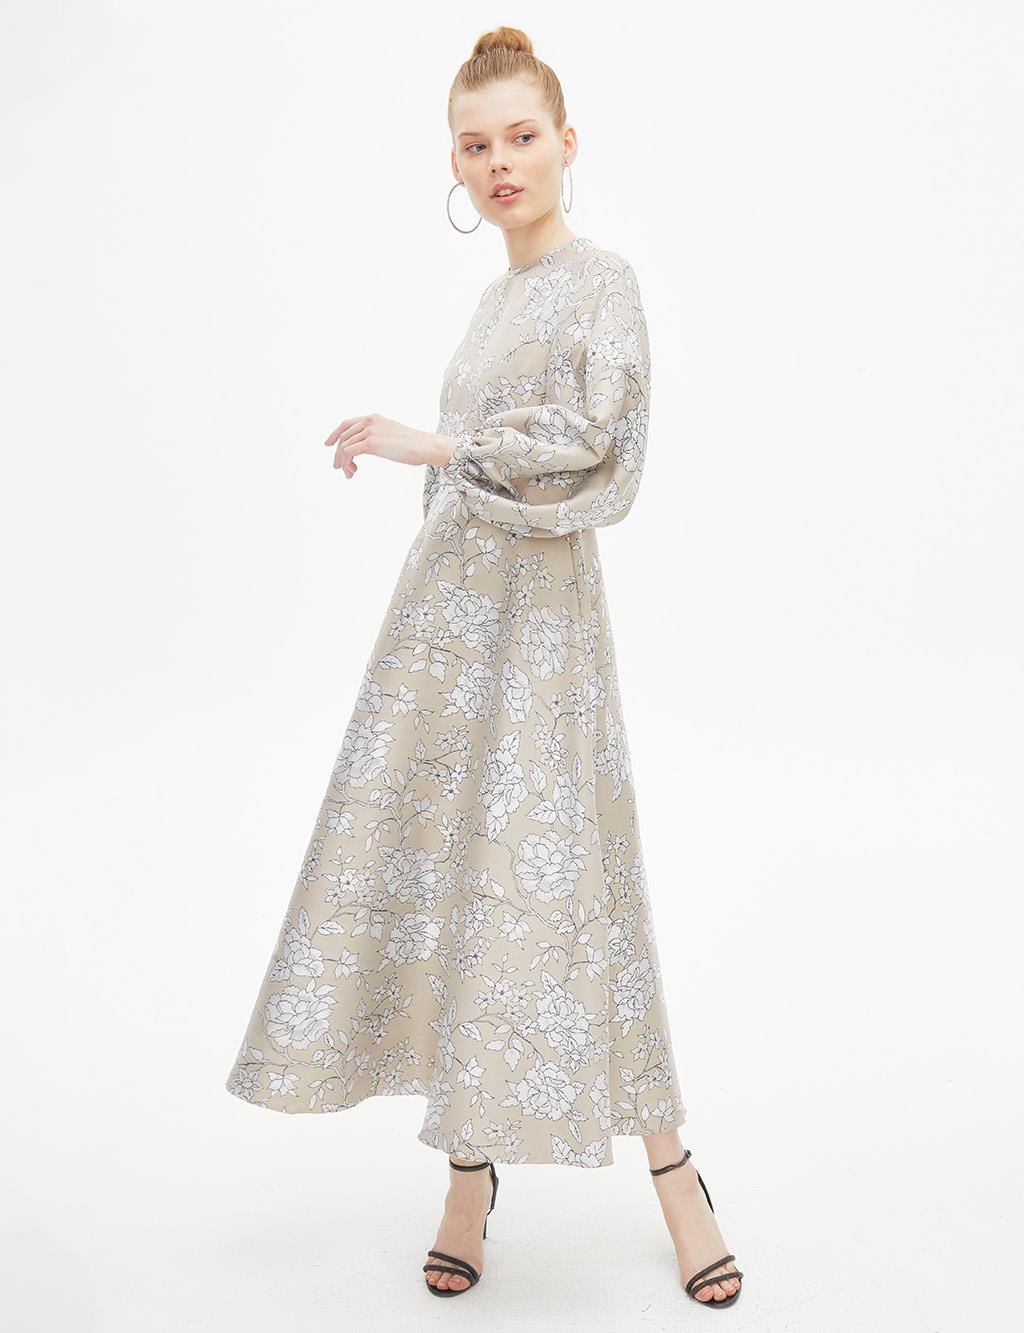 Floral Patterned Balloon Sleeve Dress Stone